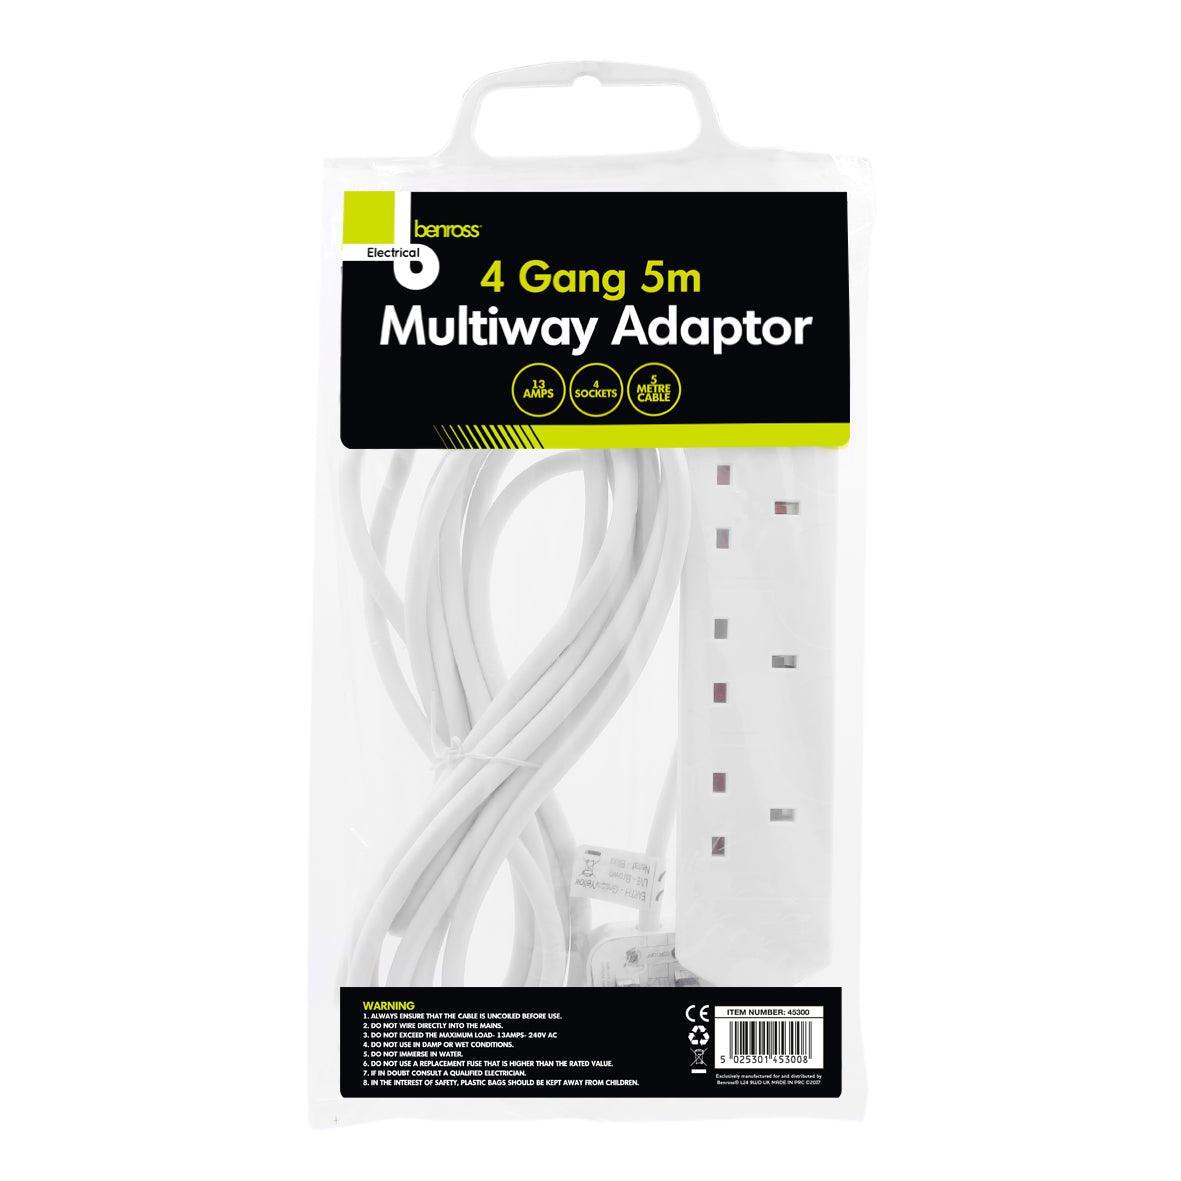 Benross 4 Gang Multiway Adaptor | 5m - Choice Stores